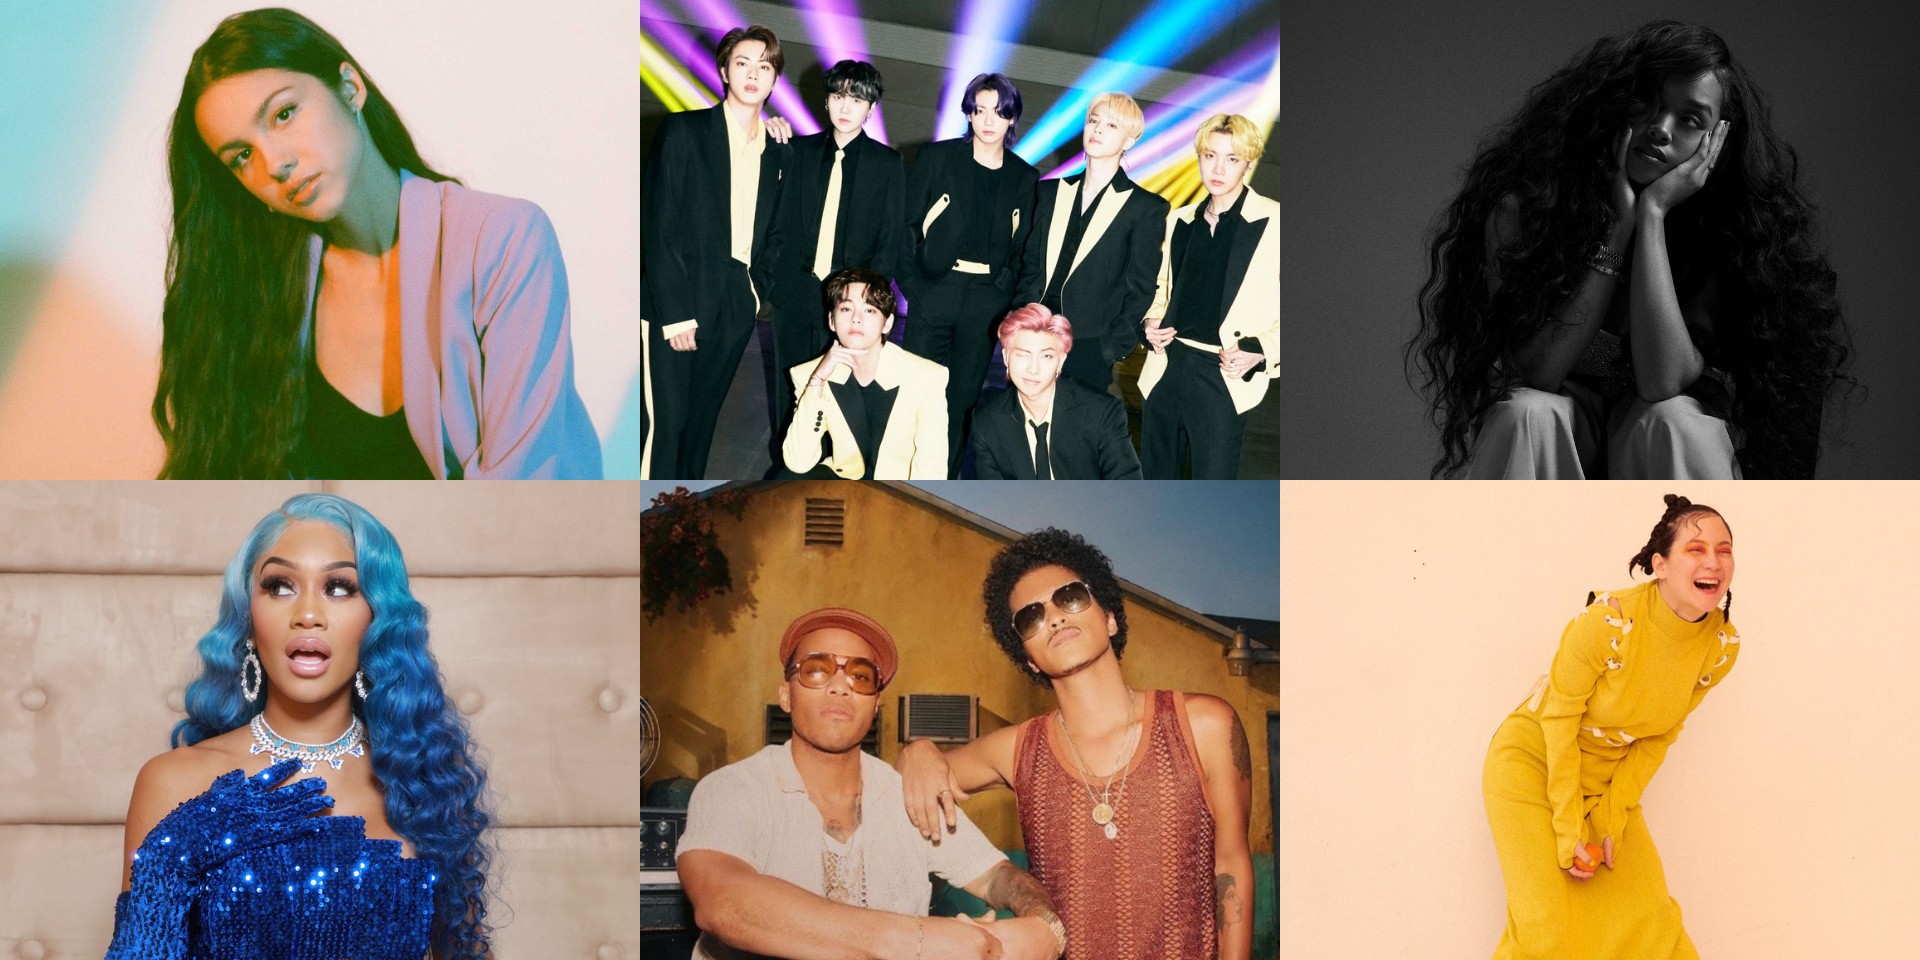 Here are the nominees of the 64th GRAMMY Awards – Olivia Rodrigo, BTS, H.E.R., Saweetie, Silk Sonic, Japanese Breakfast, and more